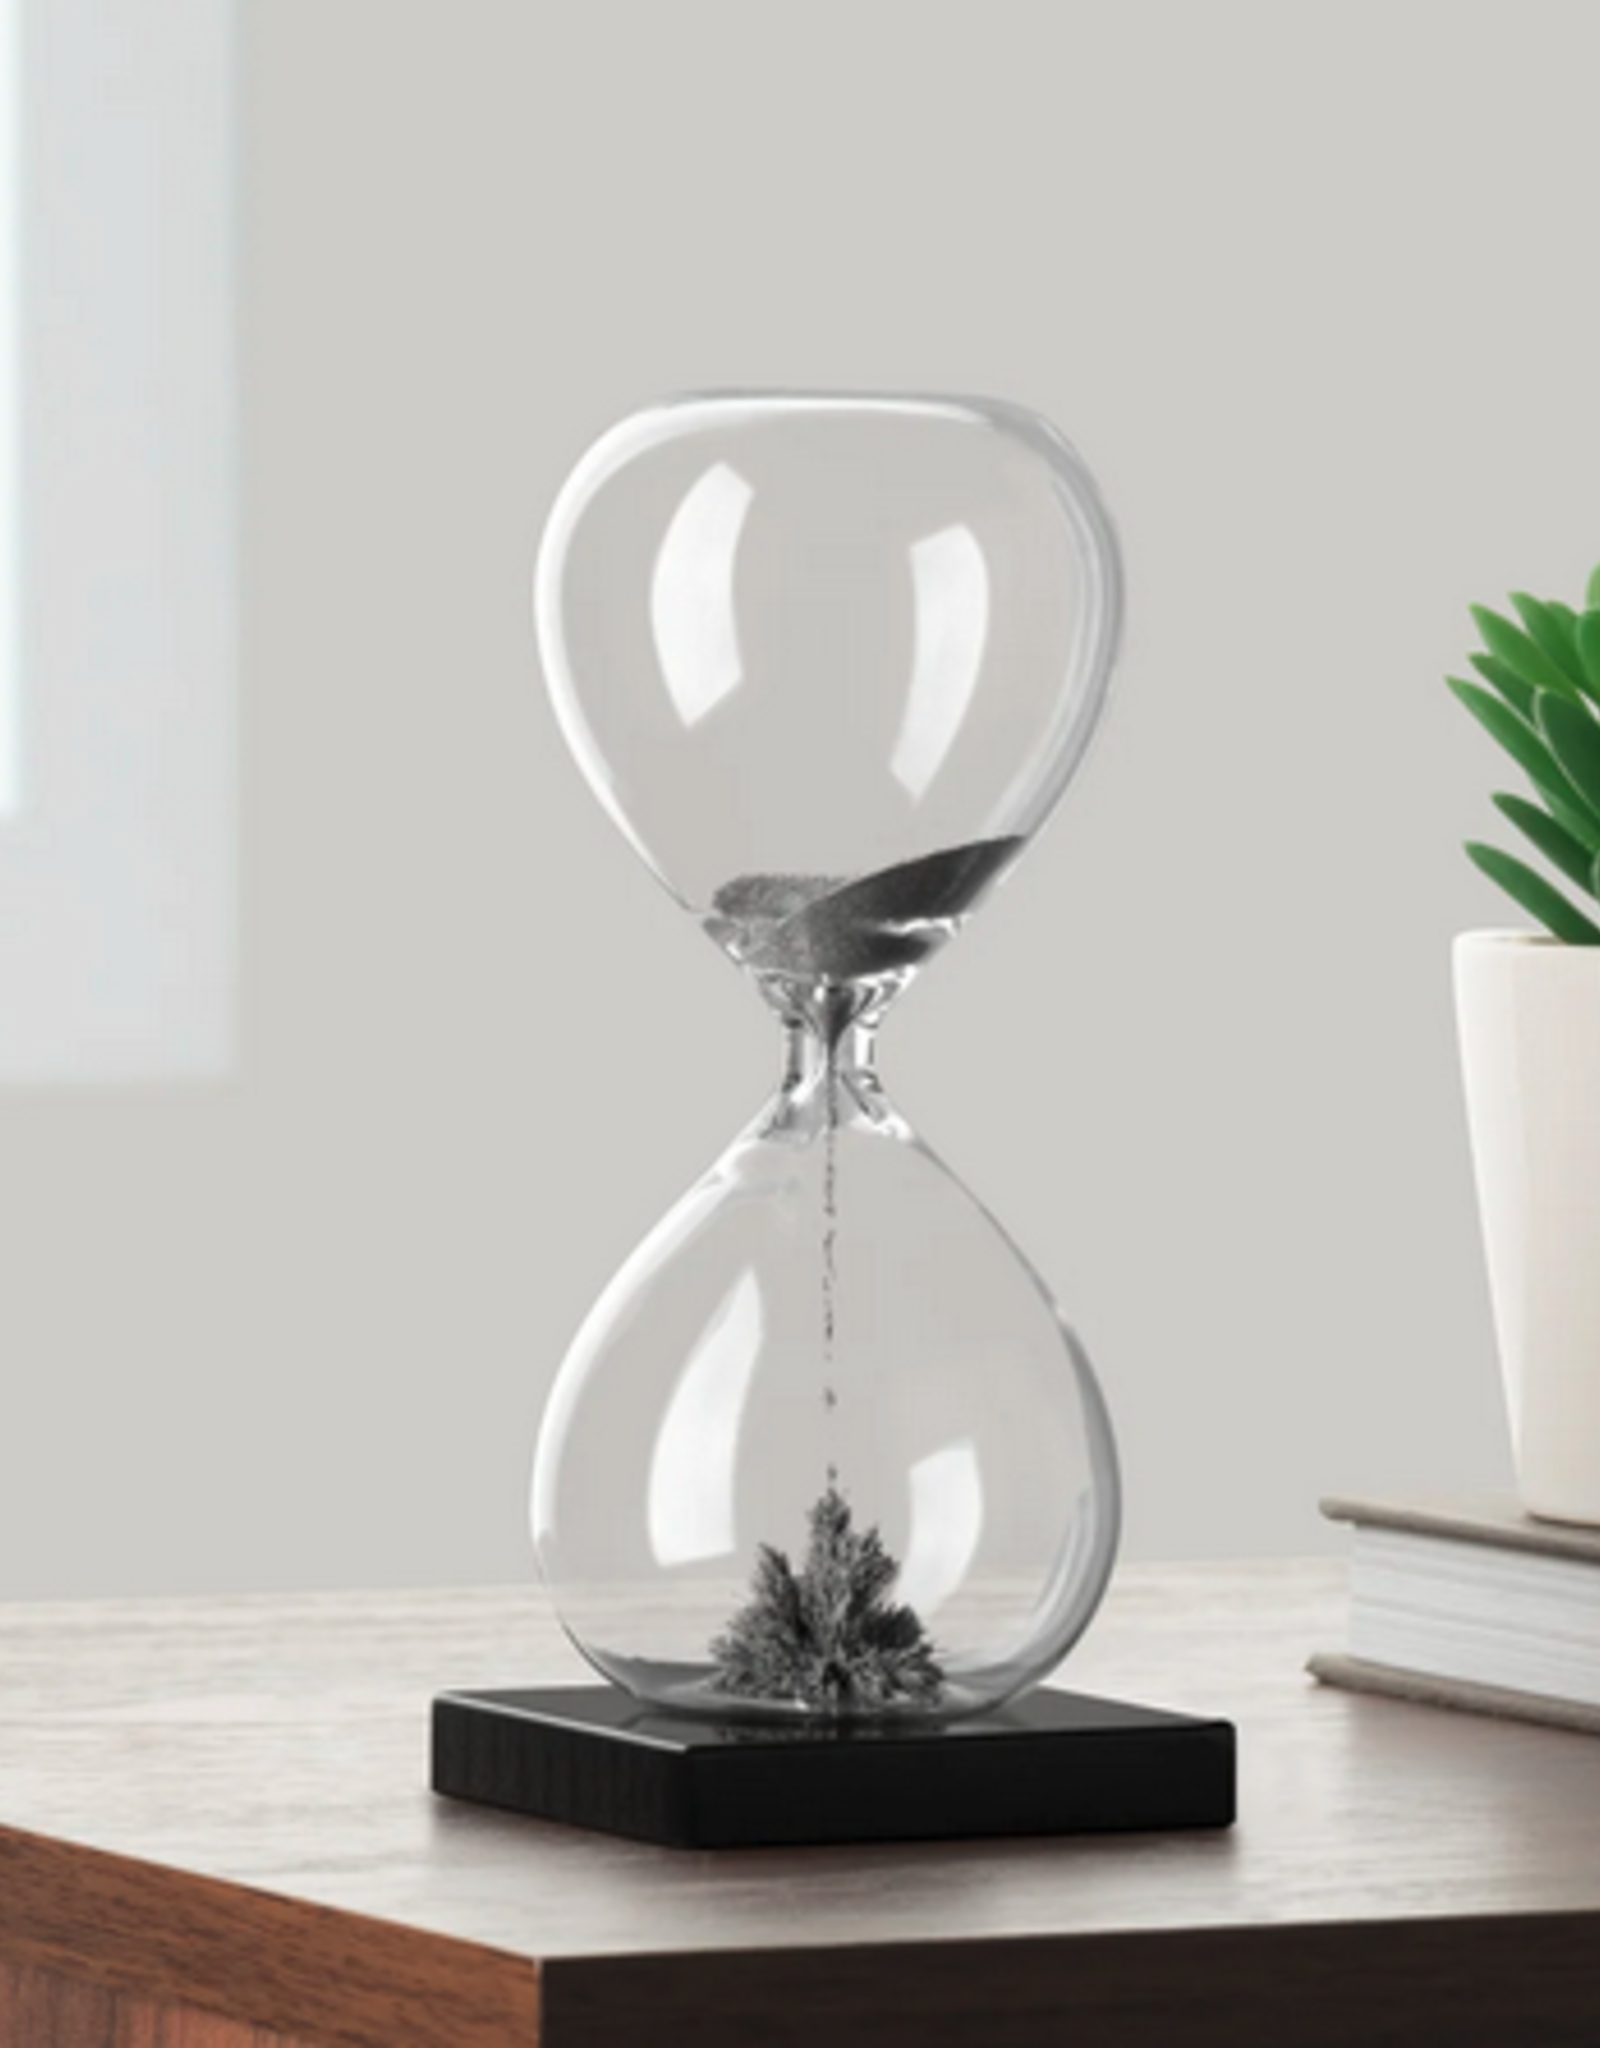 30 Second Magnetic Sand Hourglass H6.5"